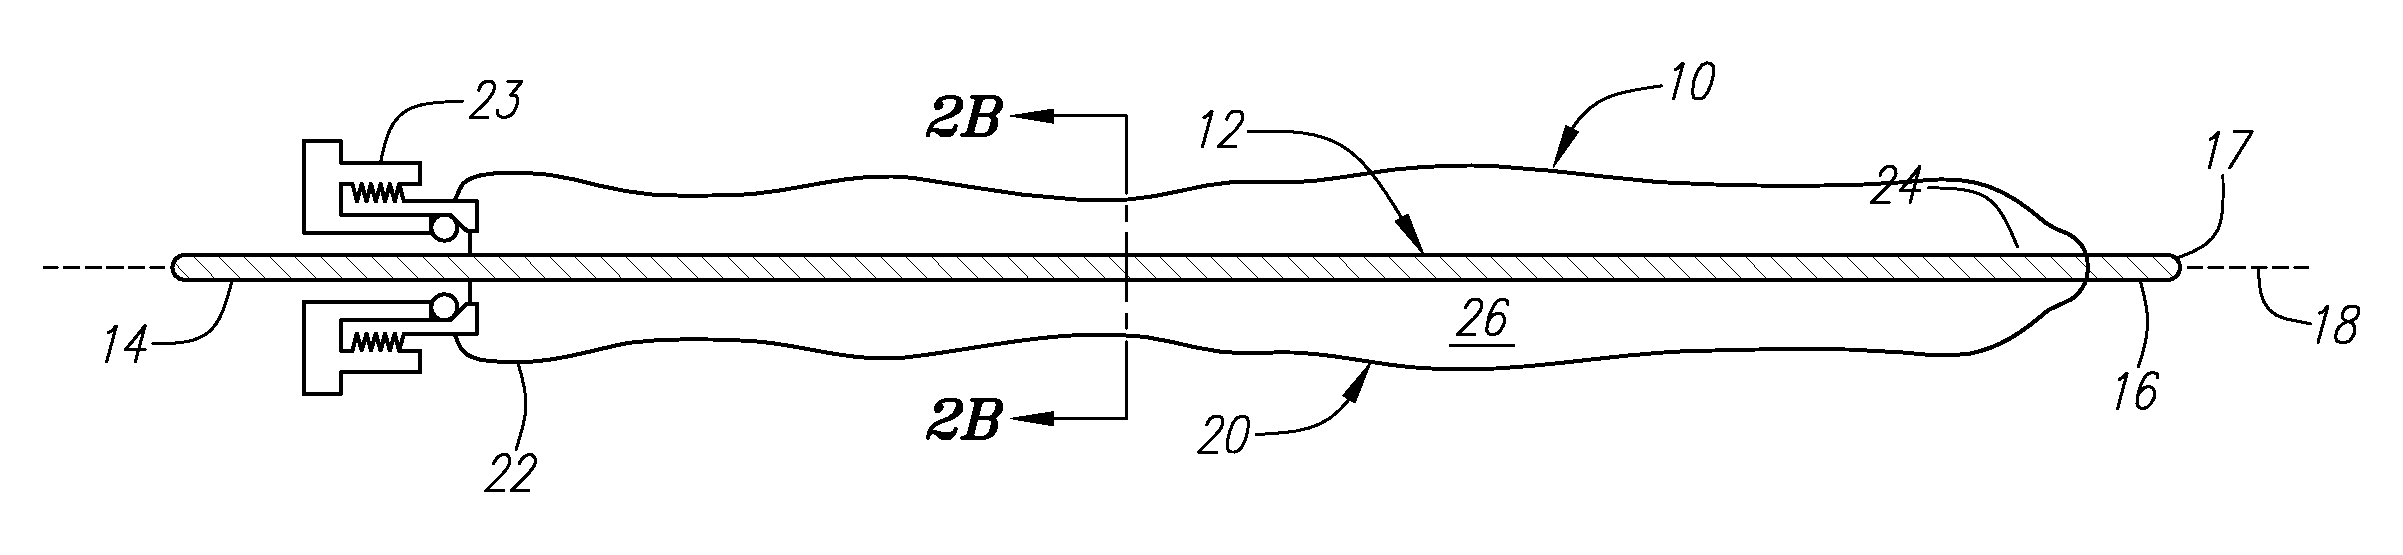 Expandable guide sheath and apparatus and methods for using such sheaths